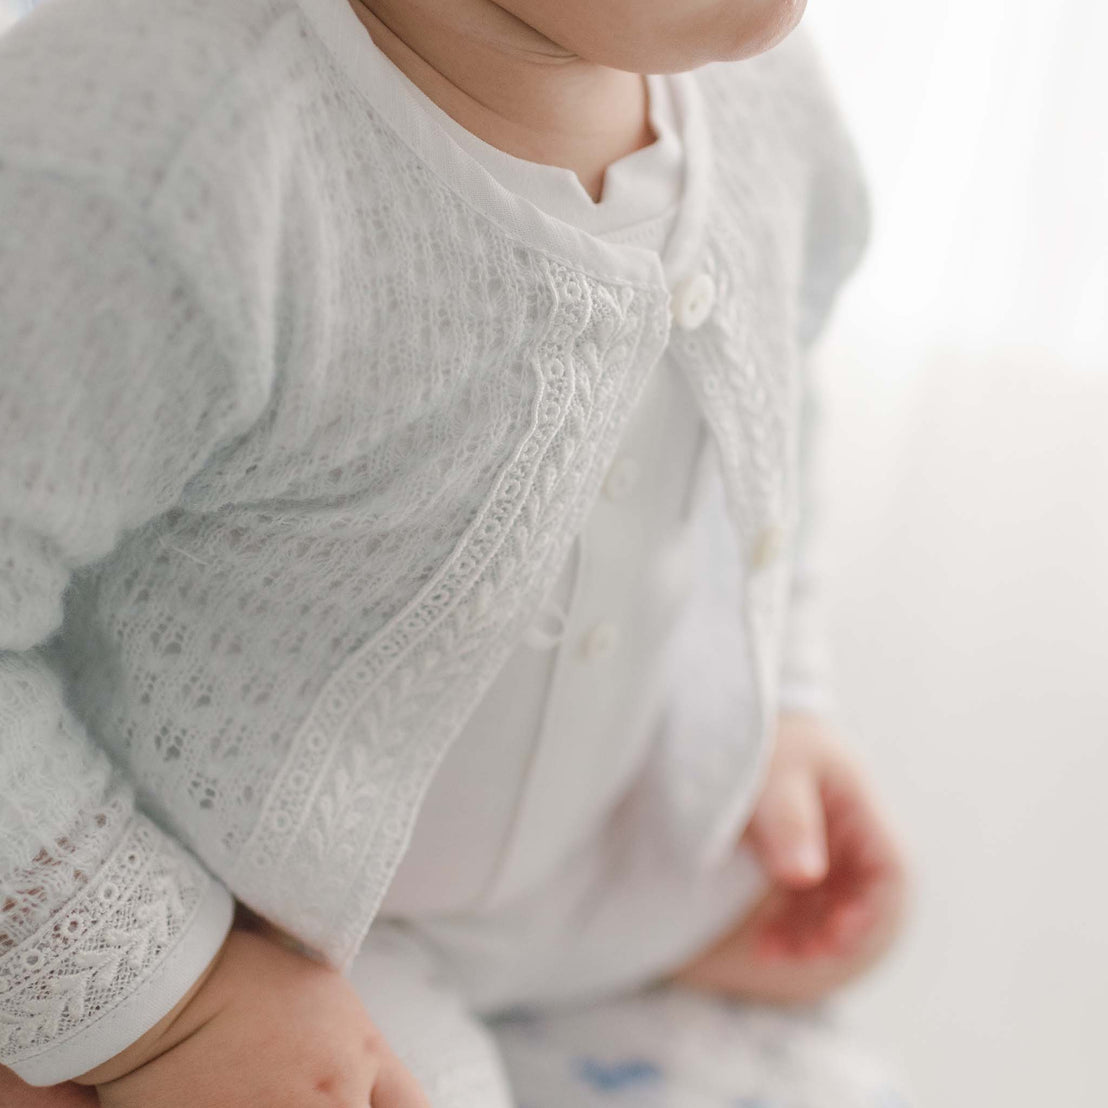 Close-up of a baby boy wearing a light blue knit Oliver Sweater, focusing on the knit sweater and matching lace and linen trim. The background is softly blurred.